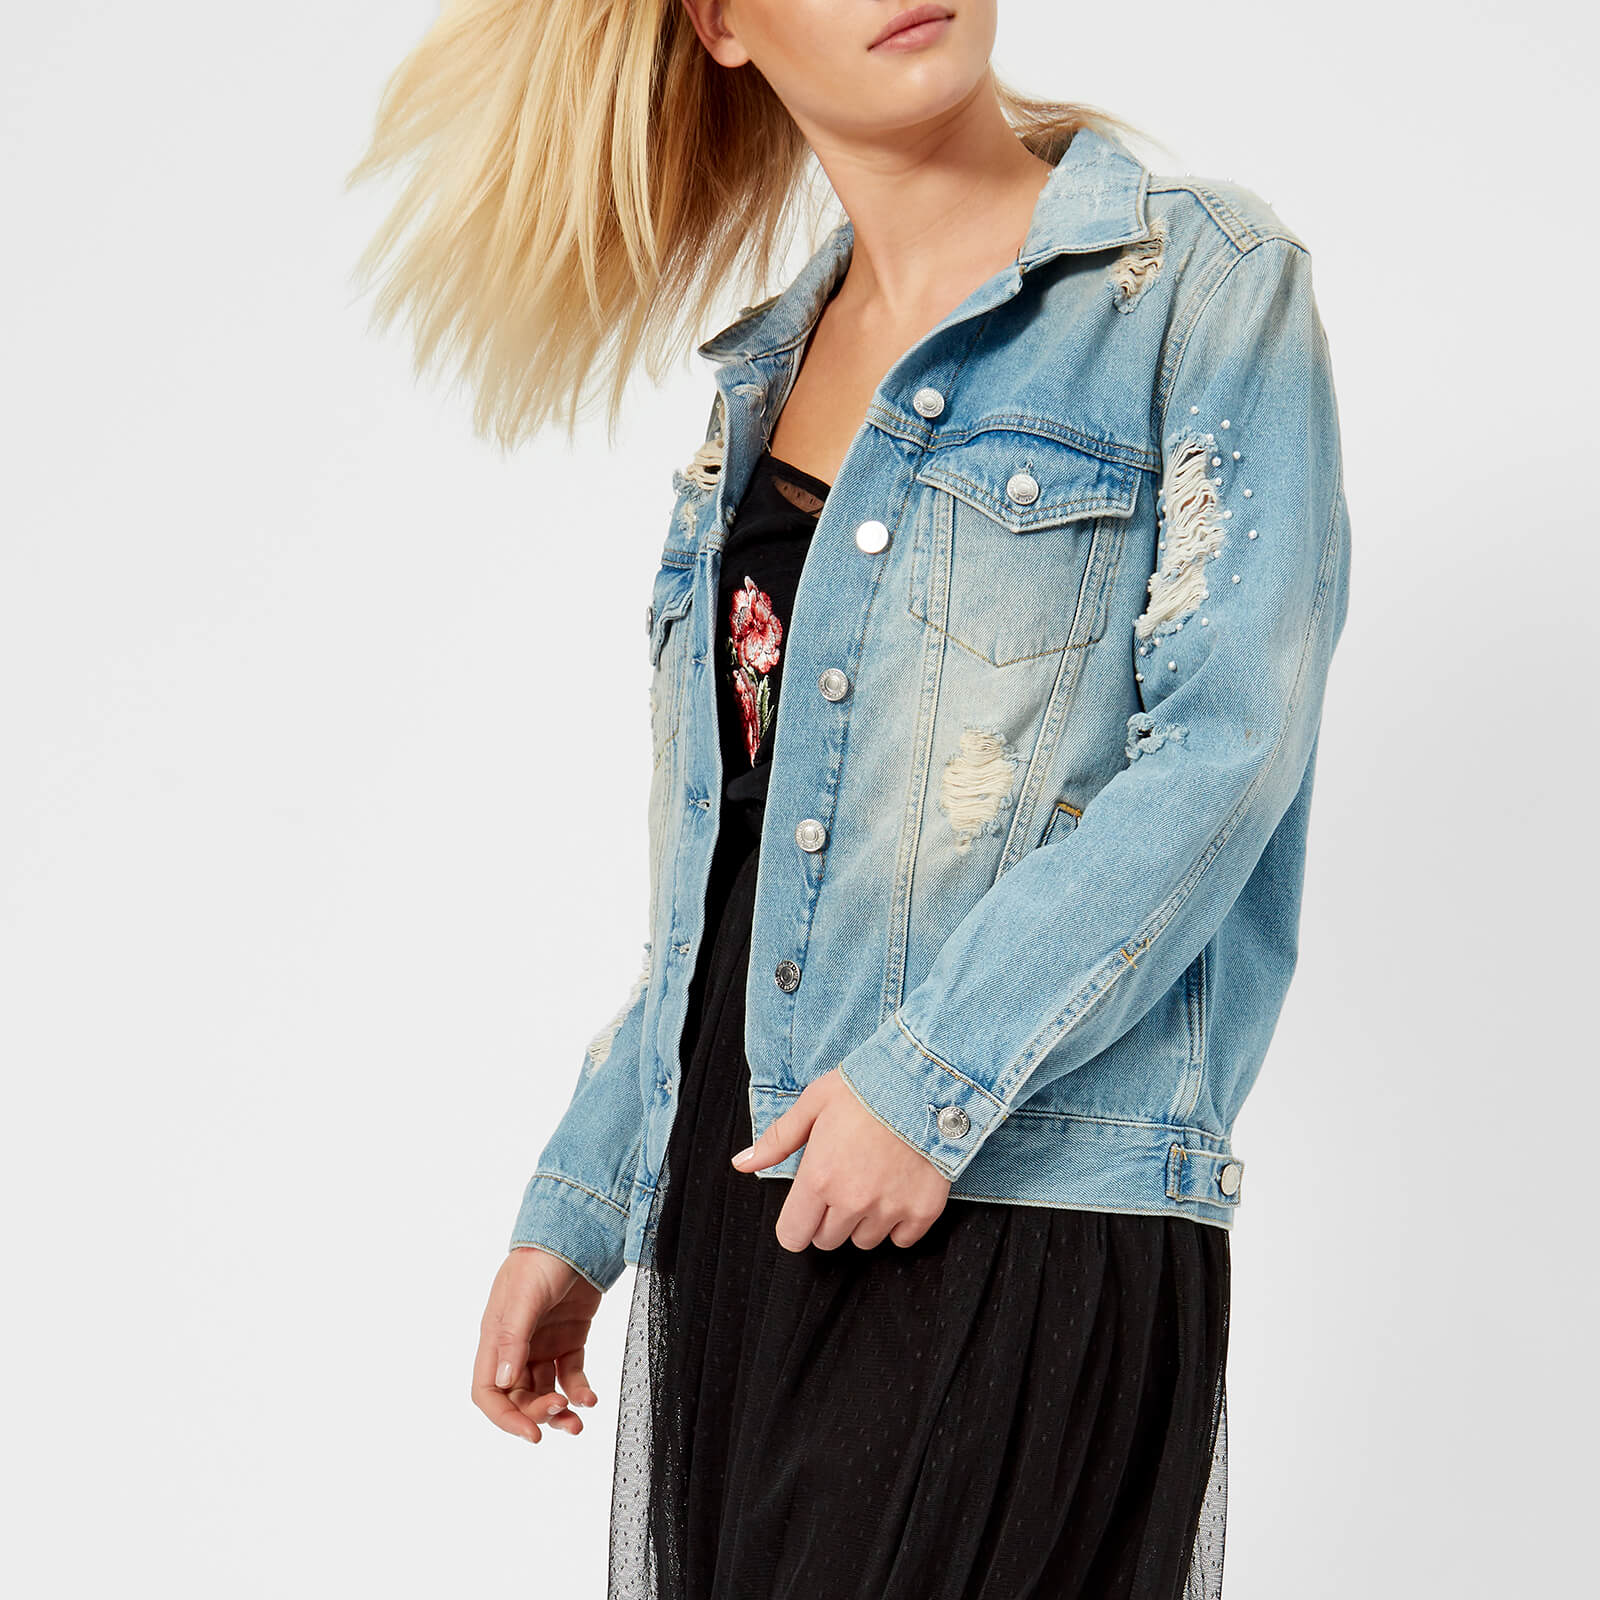 guess denim jacket with pearls